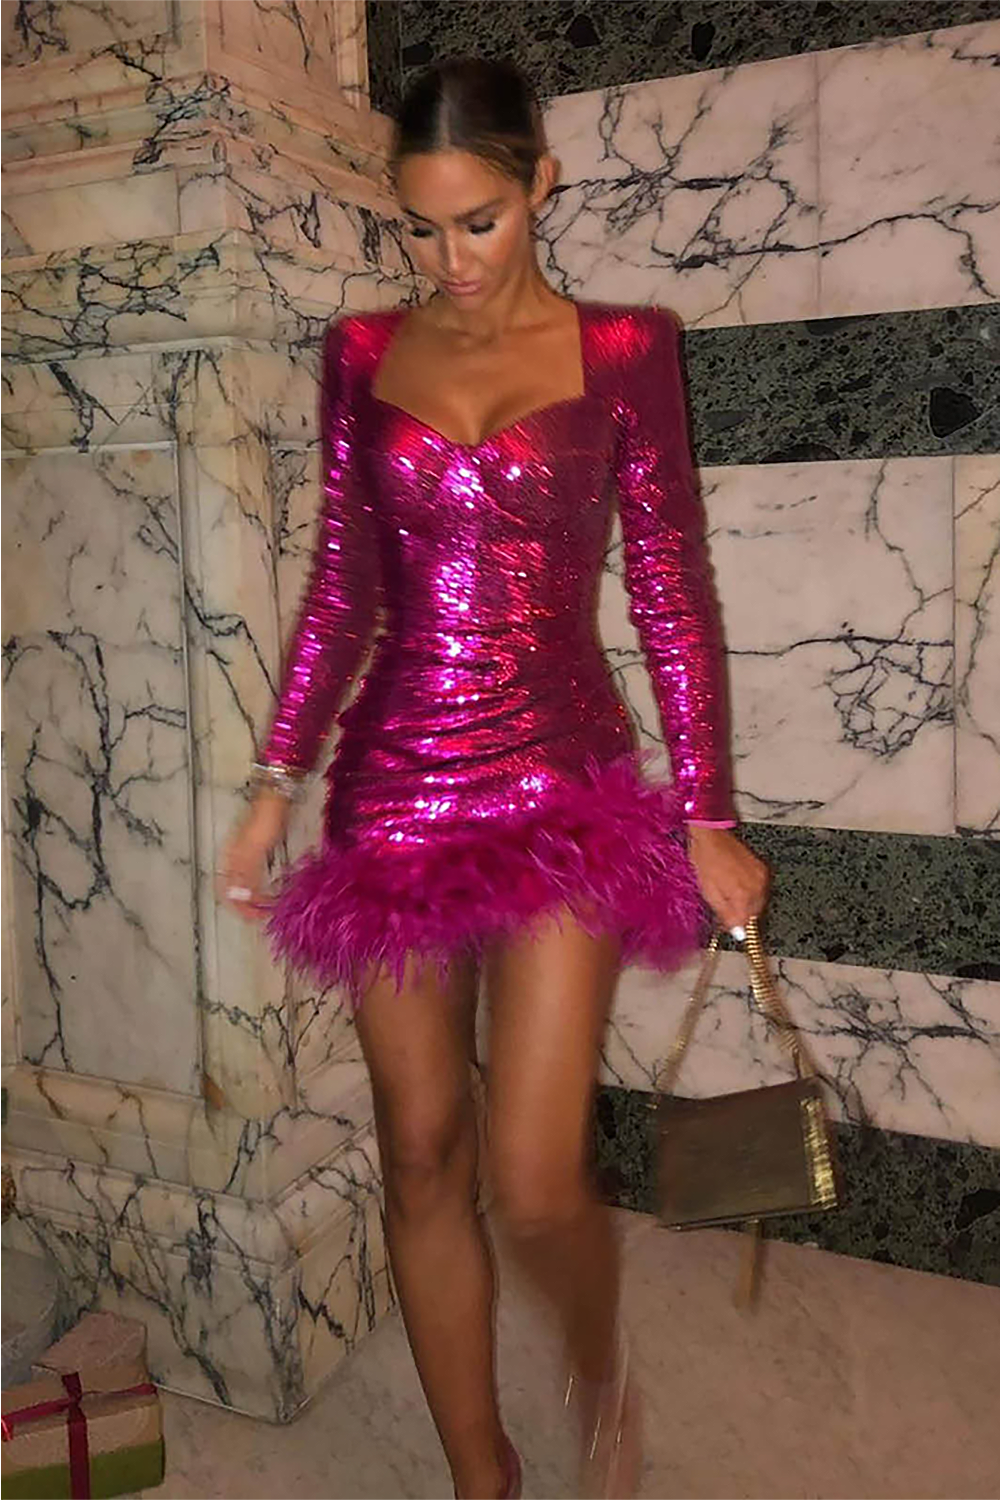 Sequins Feather-Trim Long sleeves Mini Dress